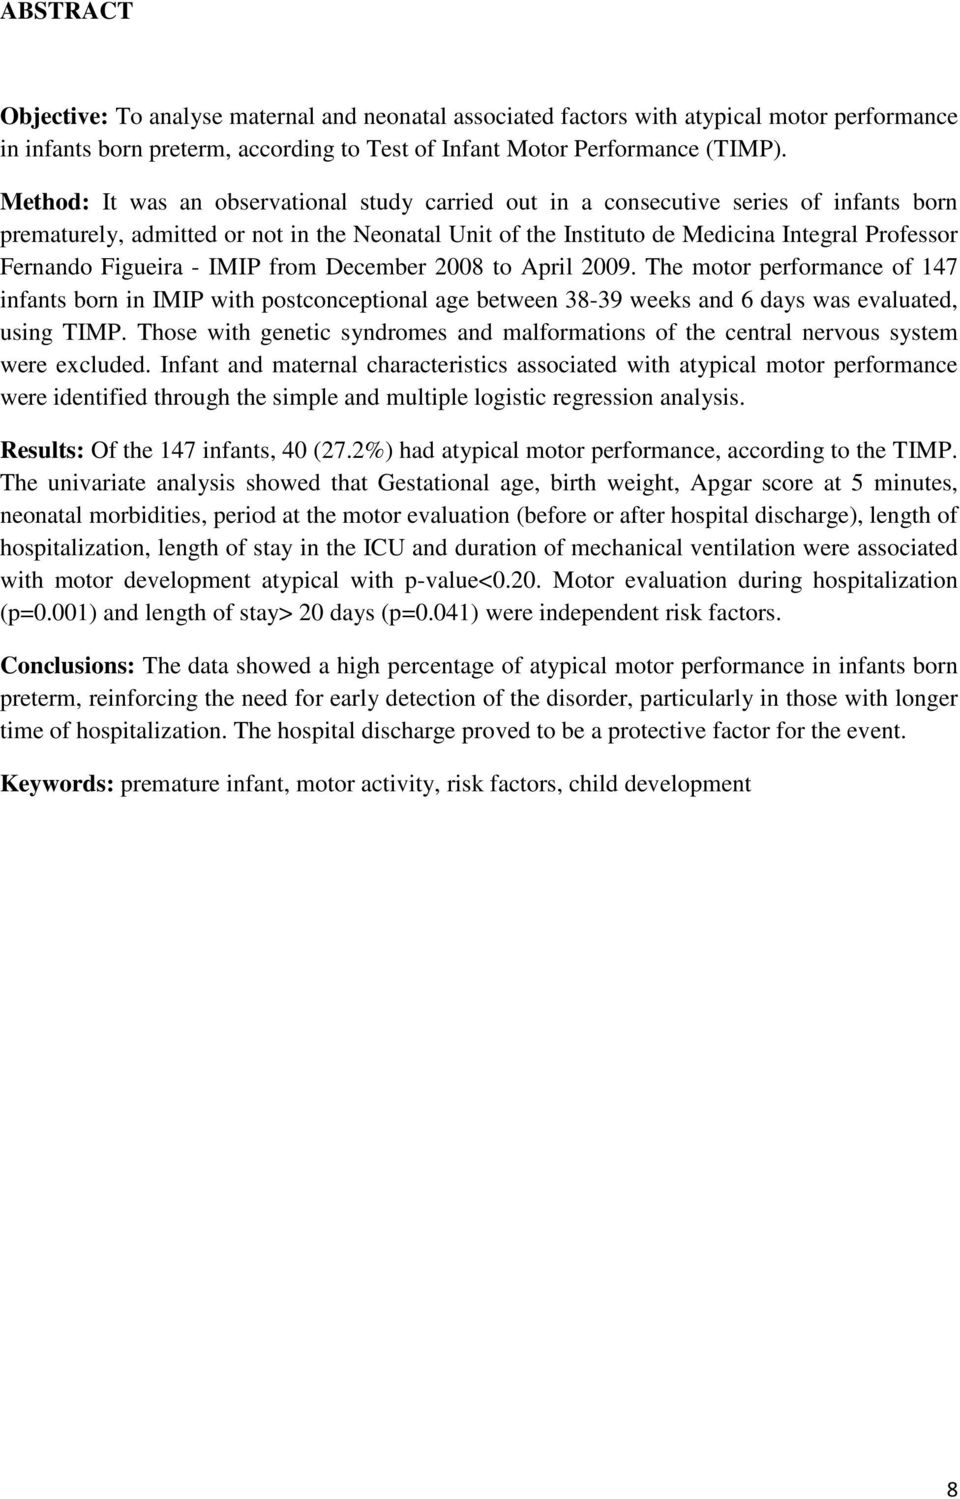 Figueira - IMIP from December 2008 to April 2009. The motor performance of 147 infants born in IMIP with postconceptional age between 38-39 weeks and 6 days was evaluated, using TIMP.